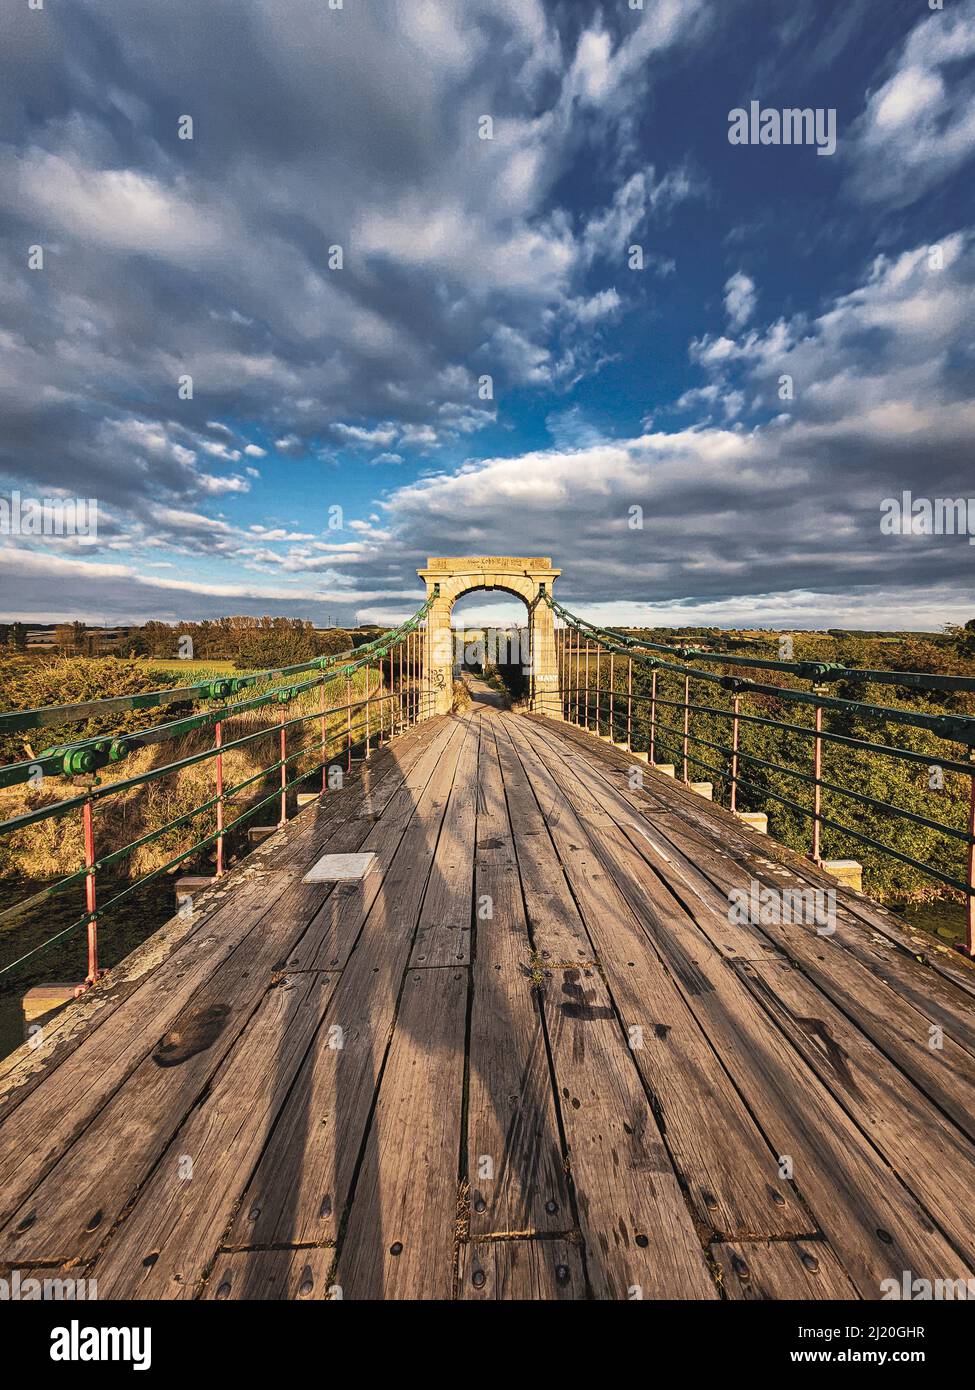 A beautiful view of Horkstow Suspension bridge over the river Ancholme in North Lincolnshire, England Stock Photo